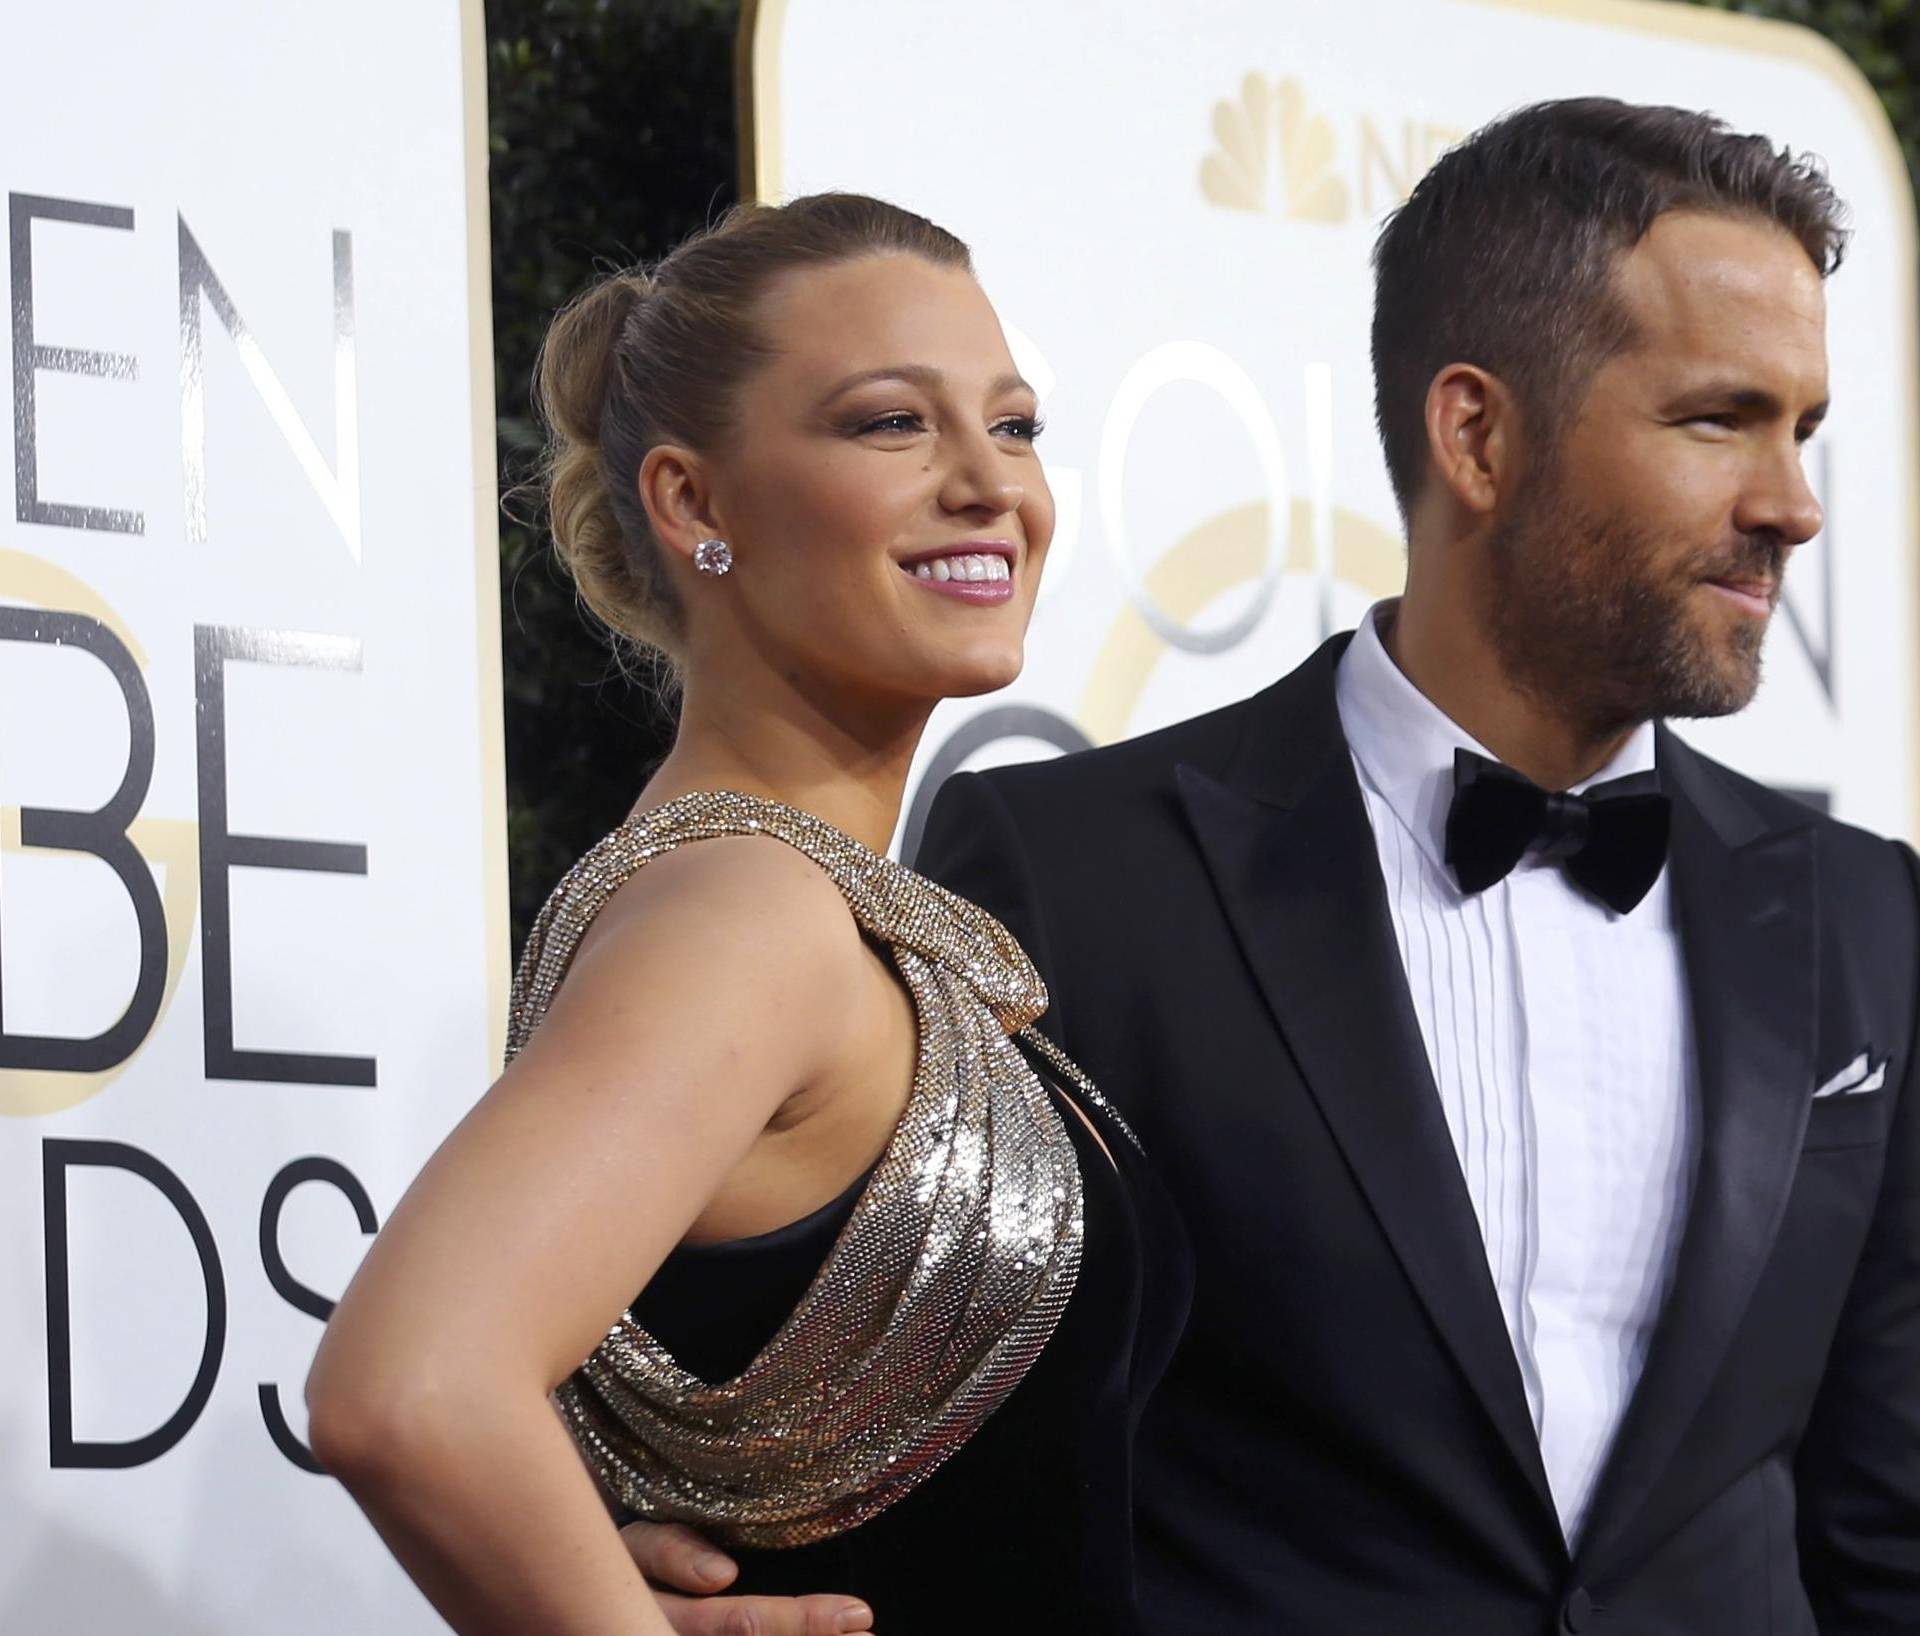 Actors Reynolds and Lively arrive at the 74th Annual Golden Globe Awards in Beverly Hills